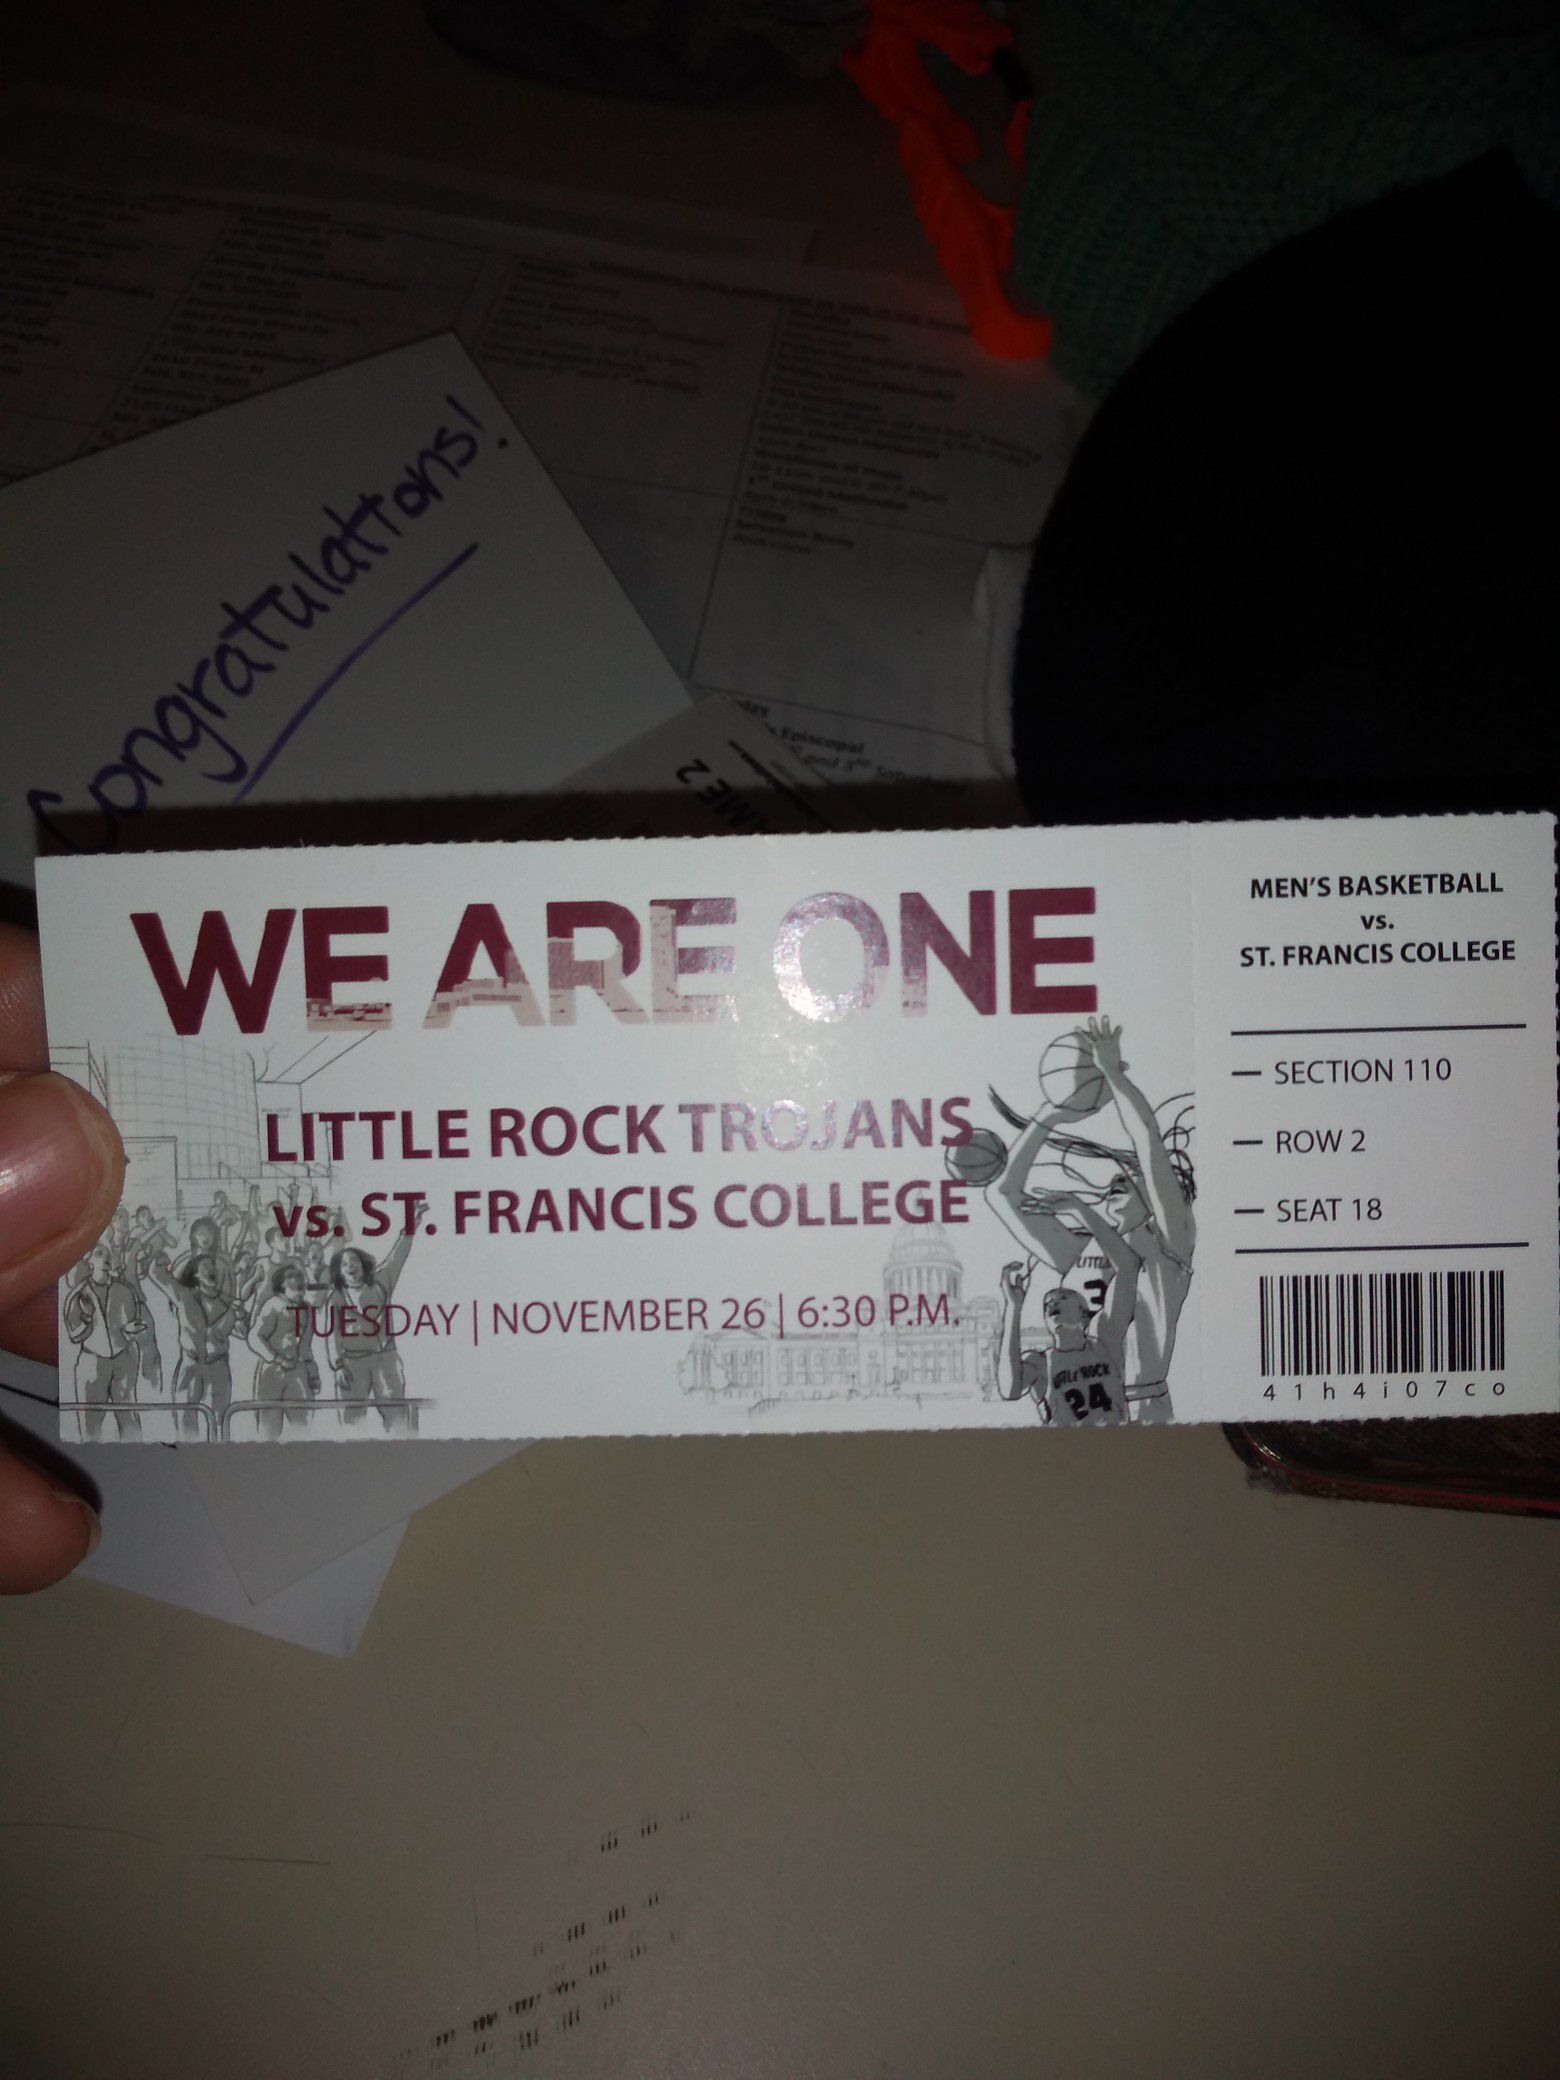 College basketball tickets